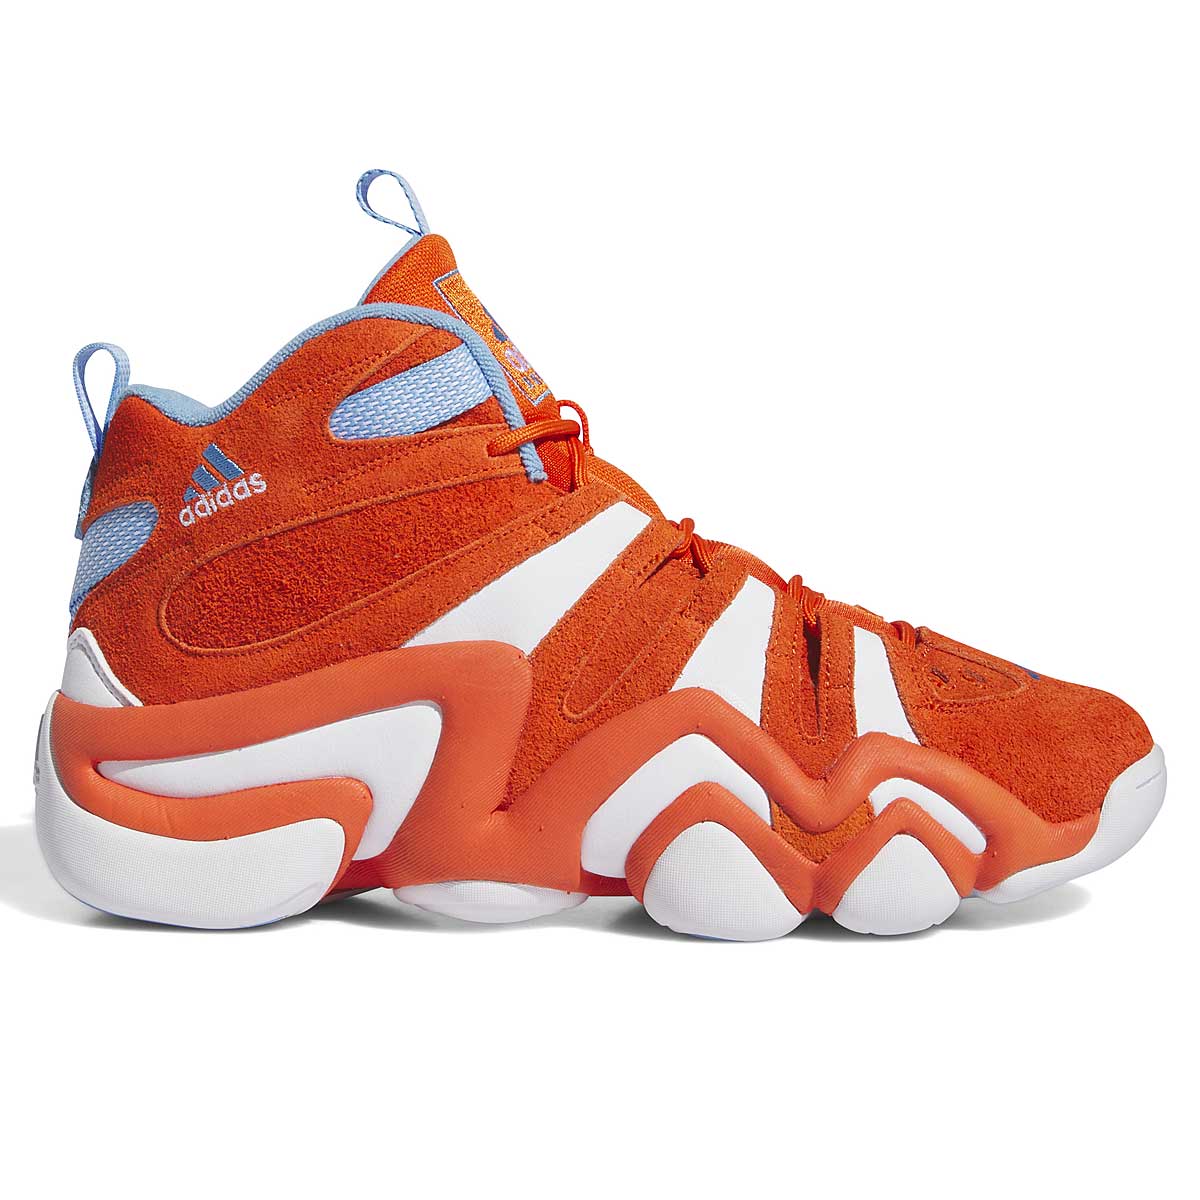 Image of Adidas Crazy 8, Red/white/blue